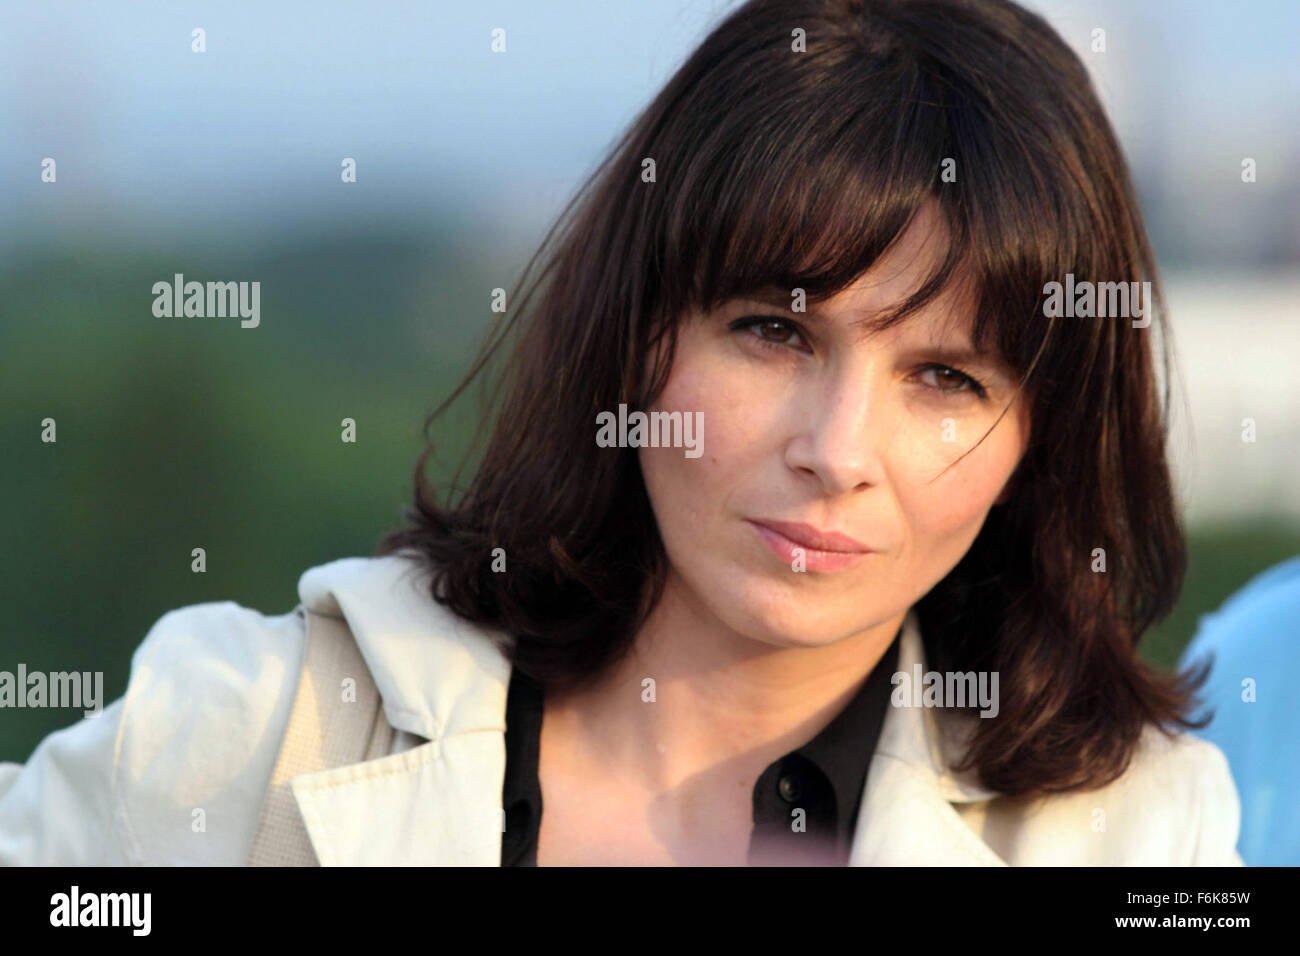 Feb 16, 2006; London, England, UK; JULIETTE BINOCHE as Amira in the dramatic film 'Breaking and Entering' , to be released March 22nd, 2006. Stock Photo